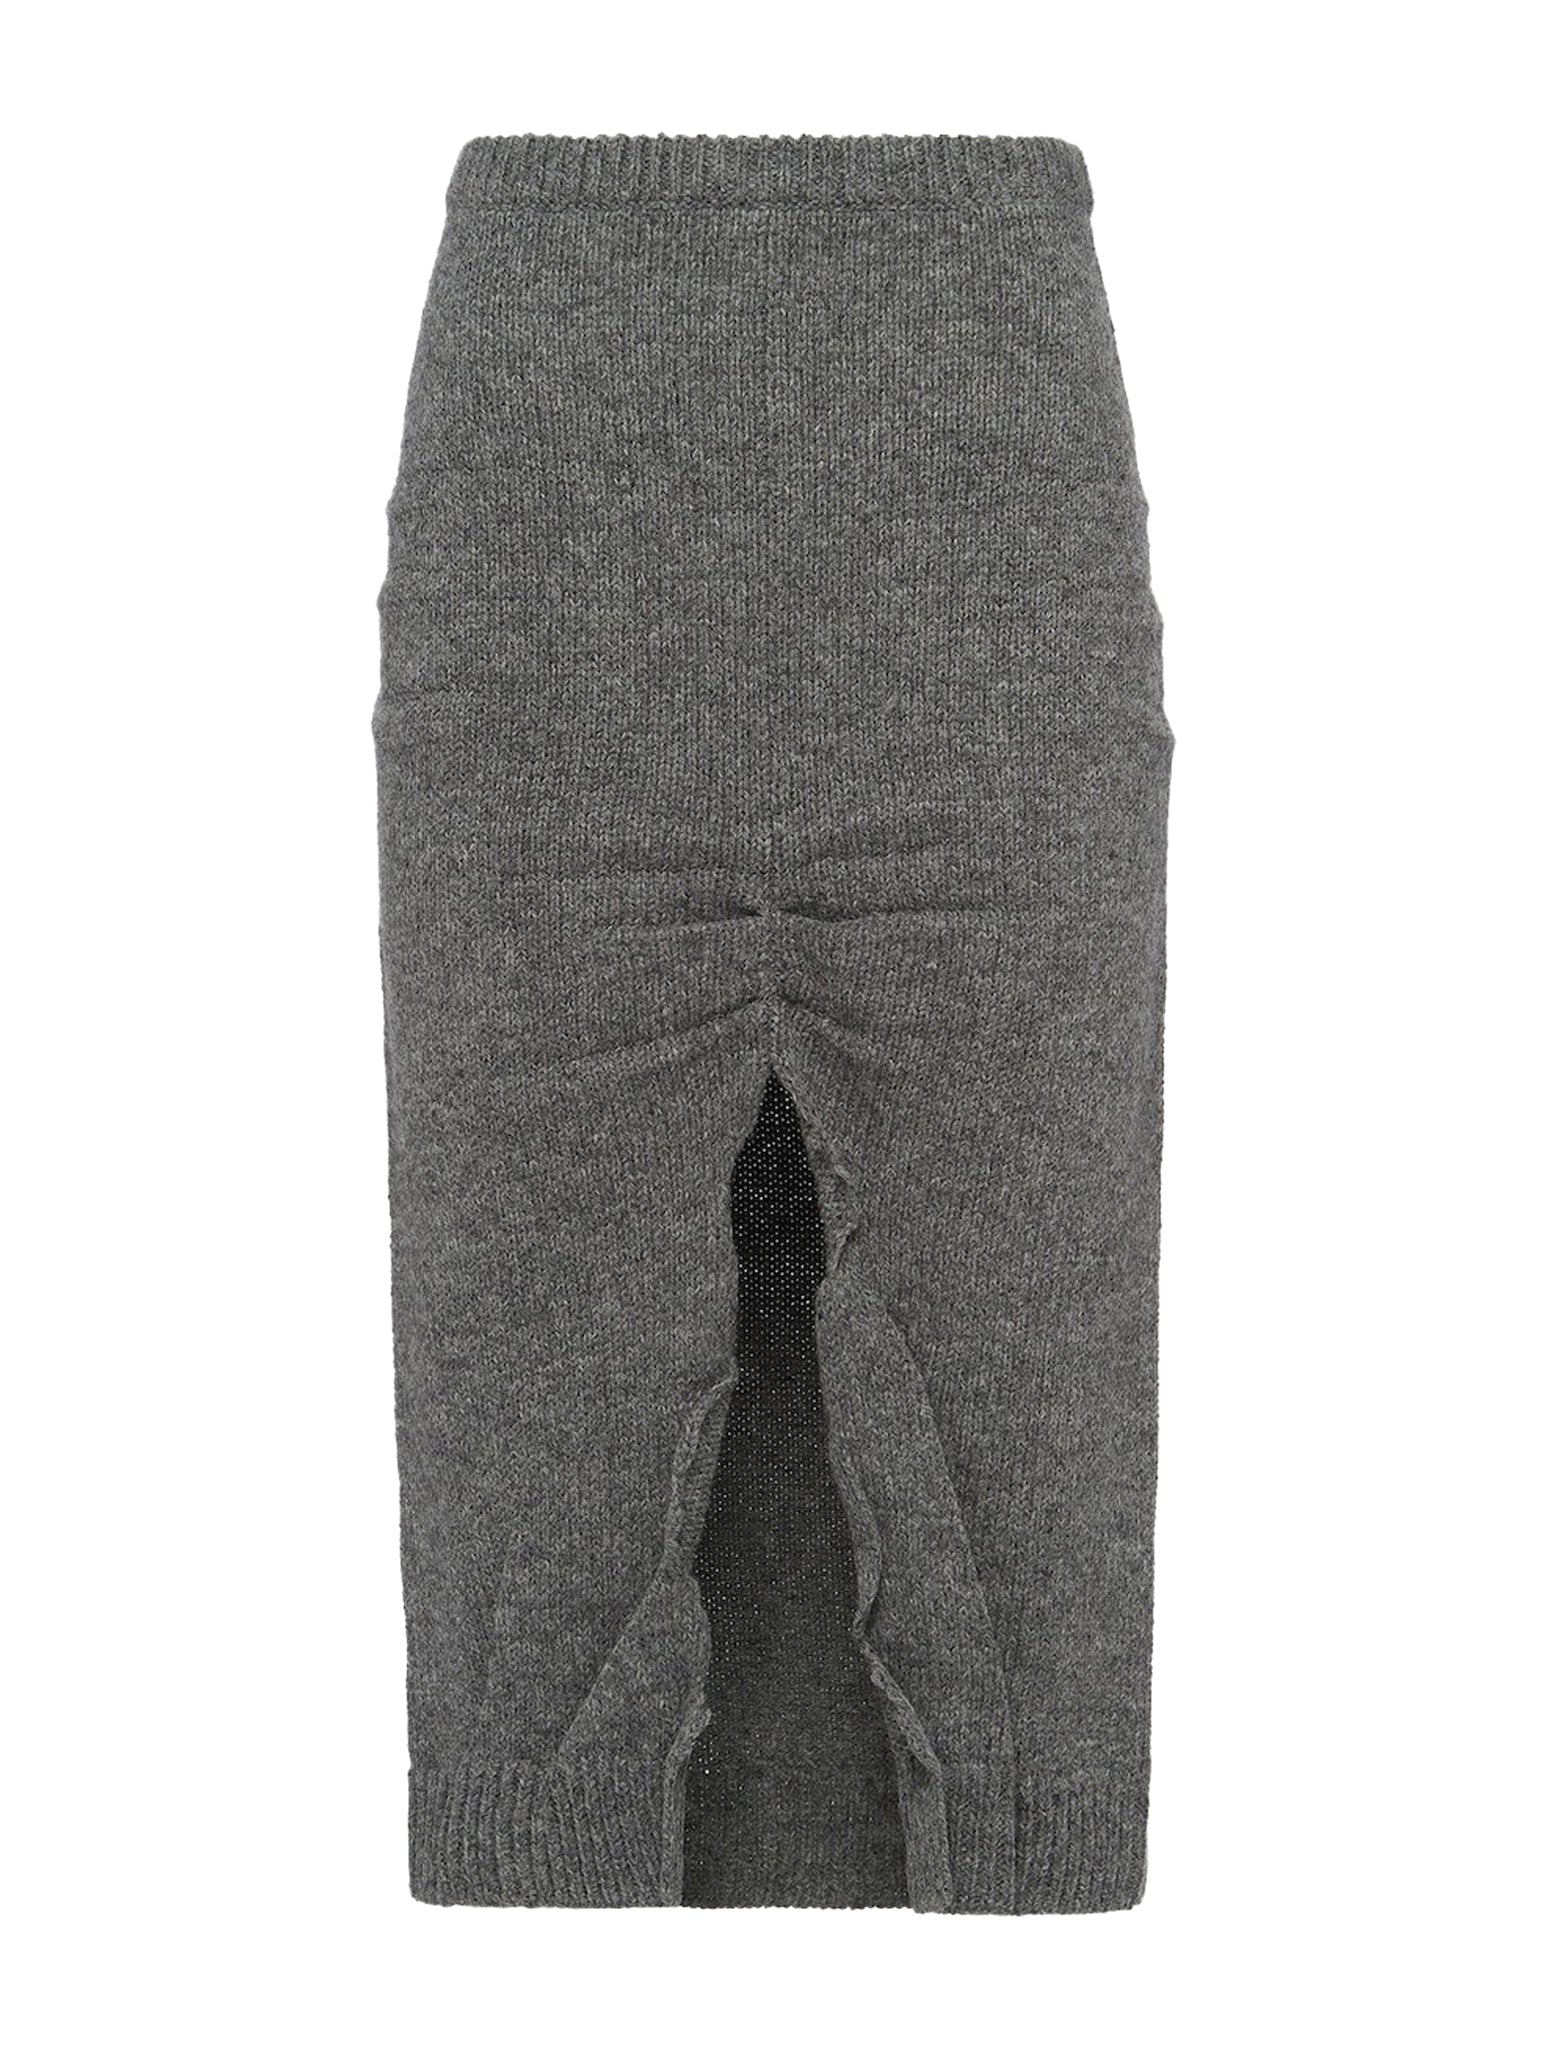 Cashmere wool skirt with slit